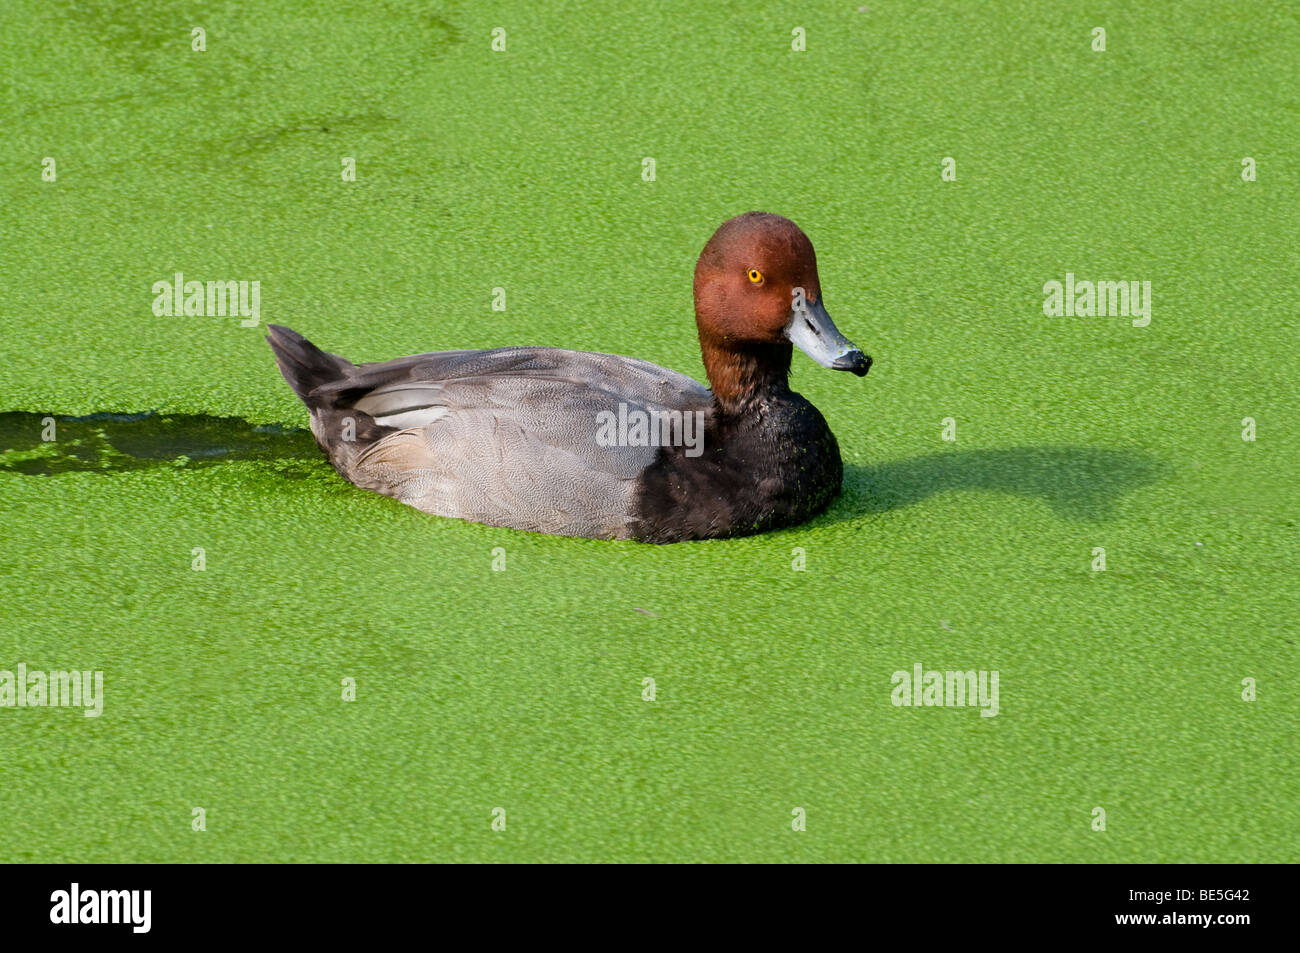 A Redhead Duck in a sea of duck-weed Stock Photo